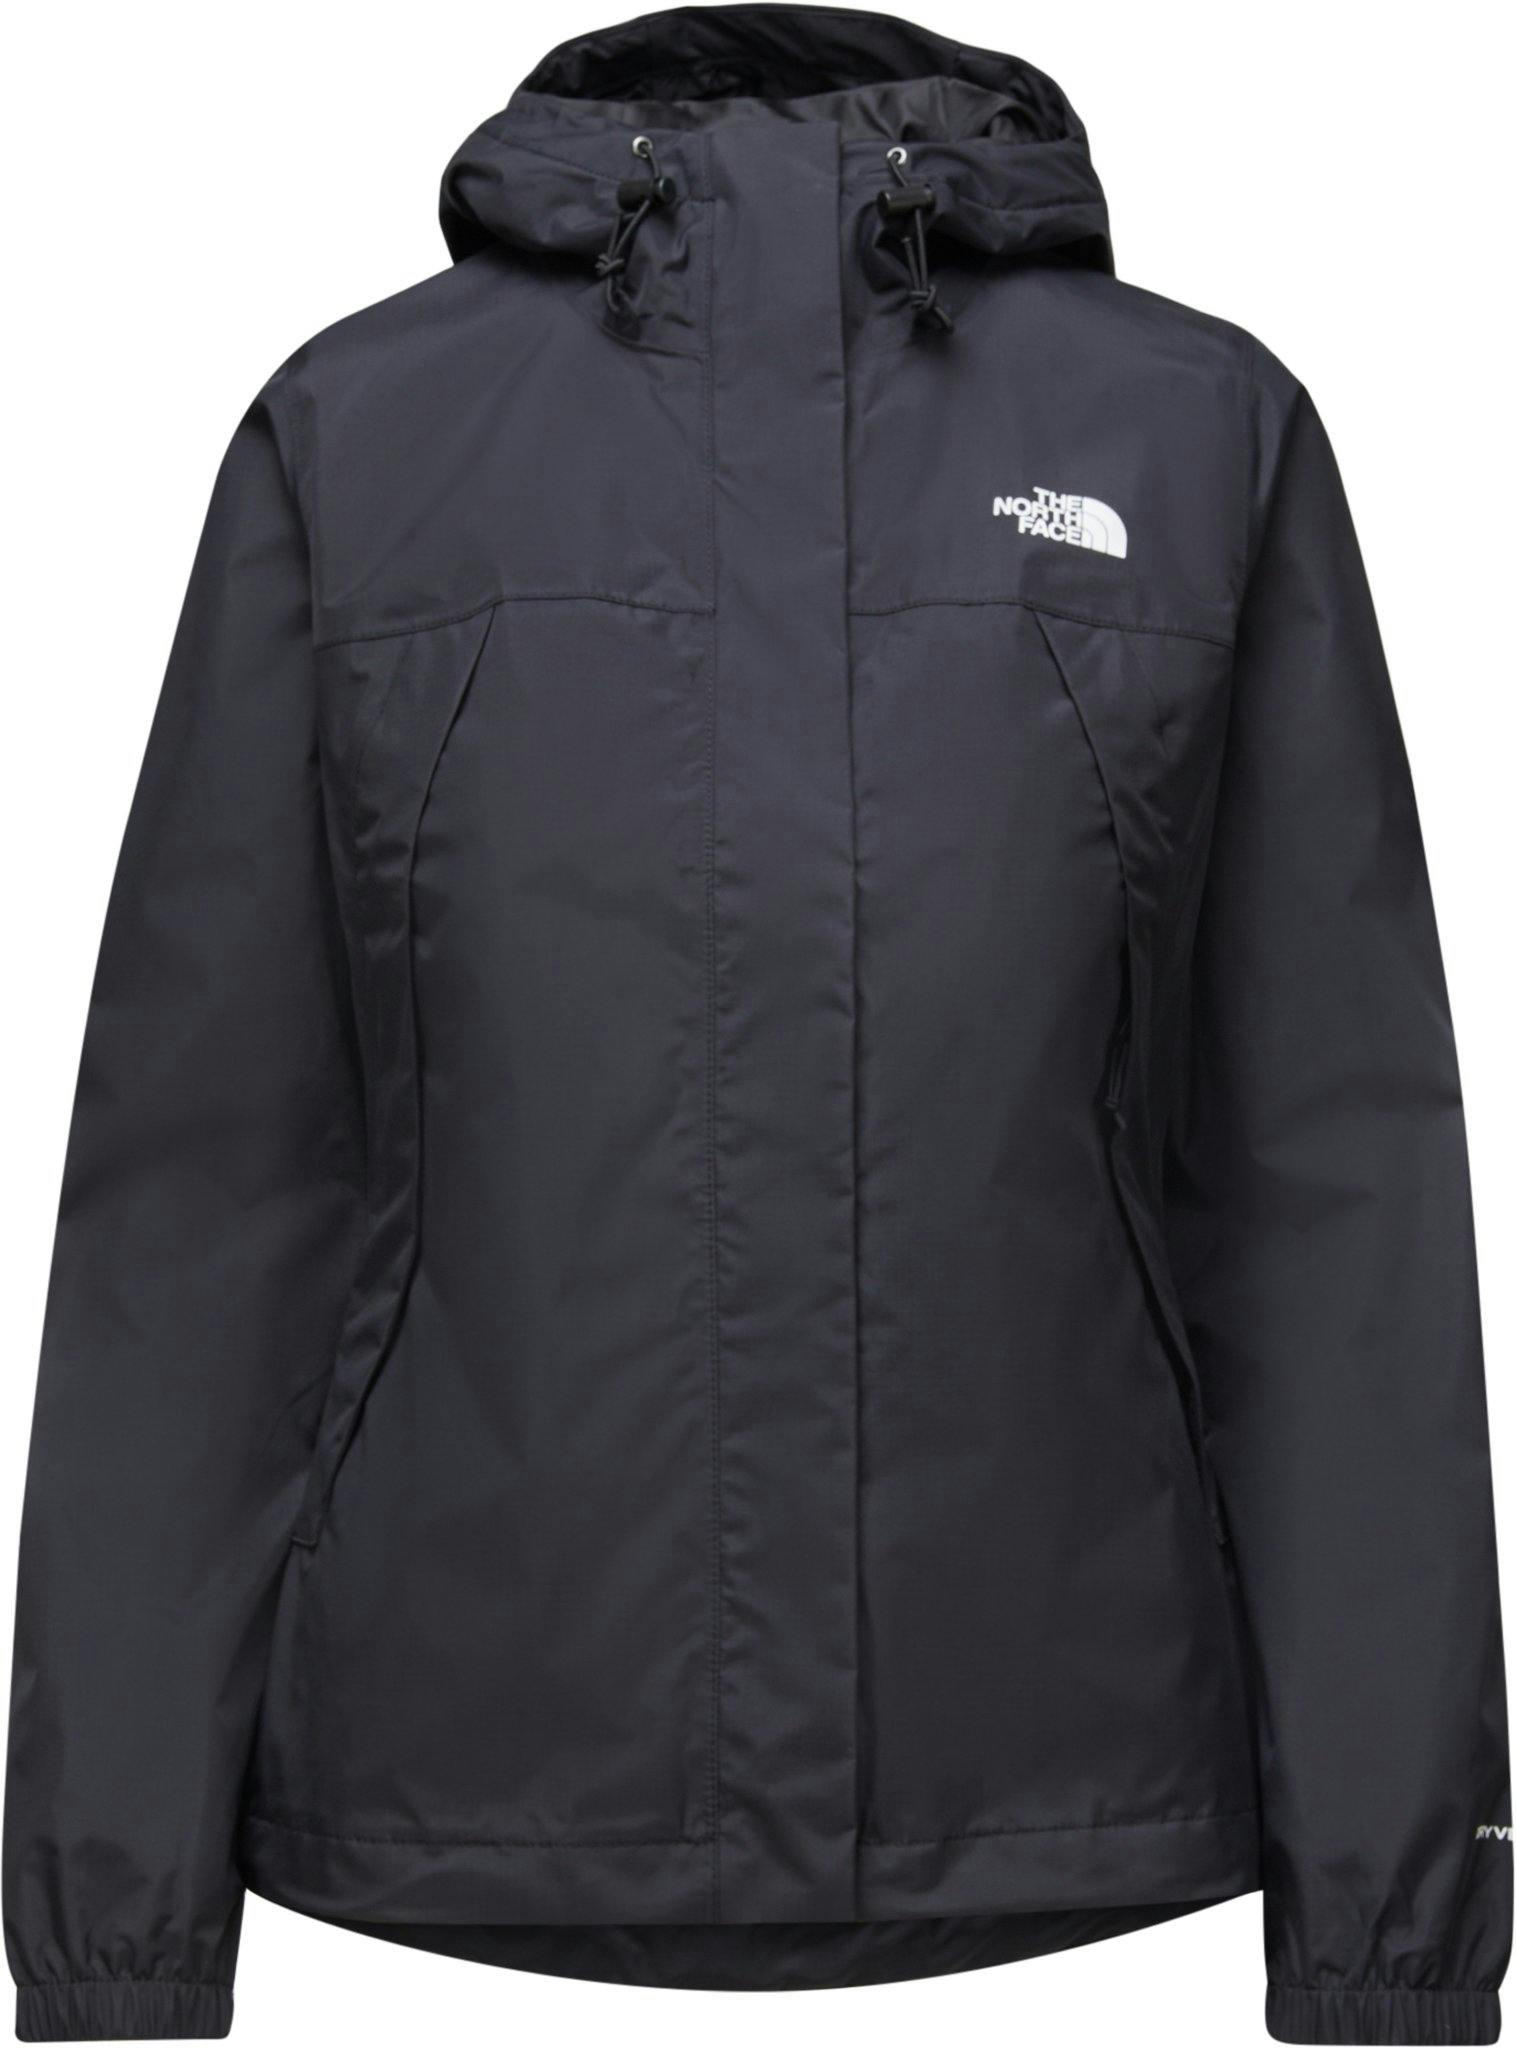 Product image for Antora Jacket - Women's